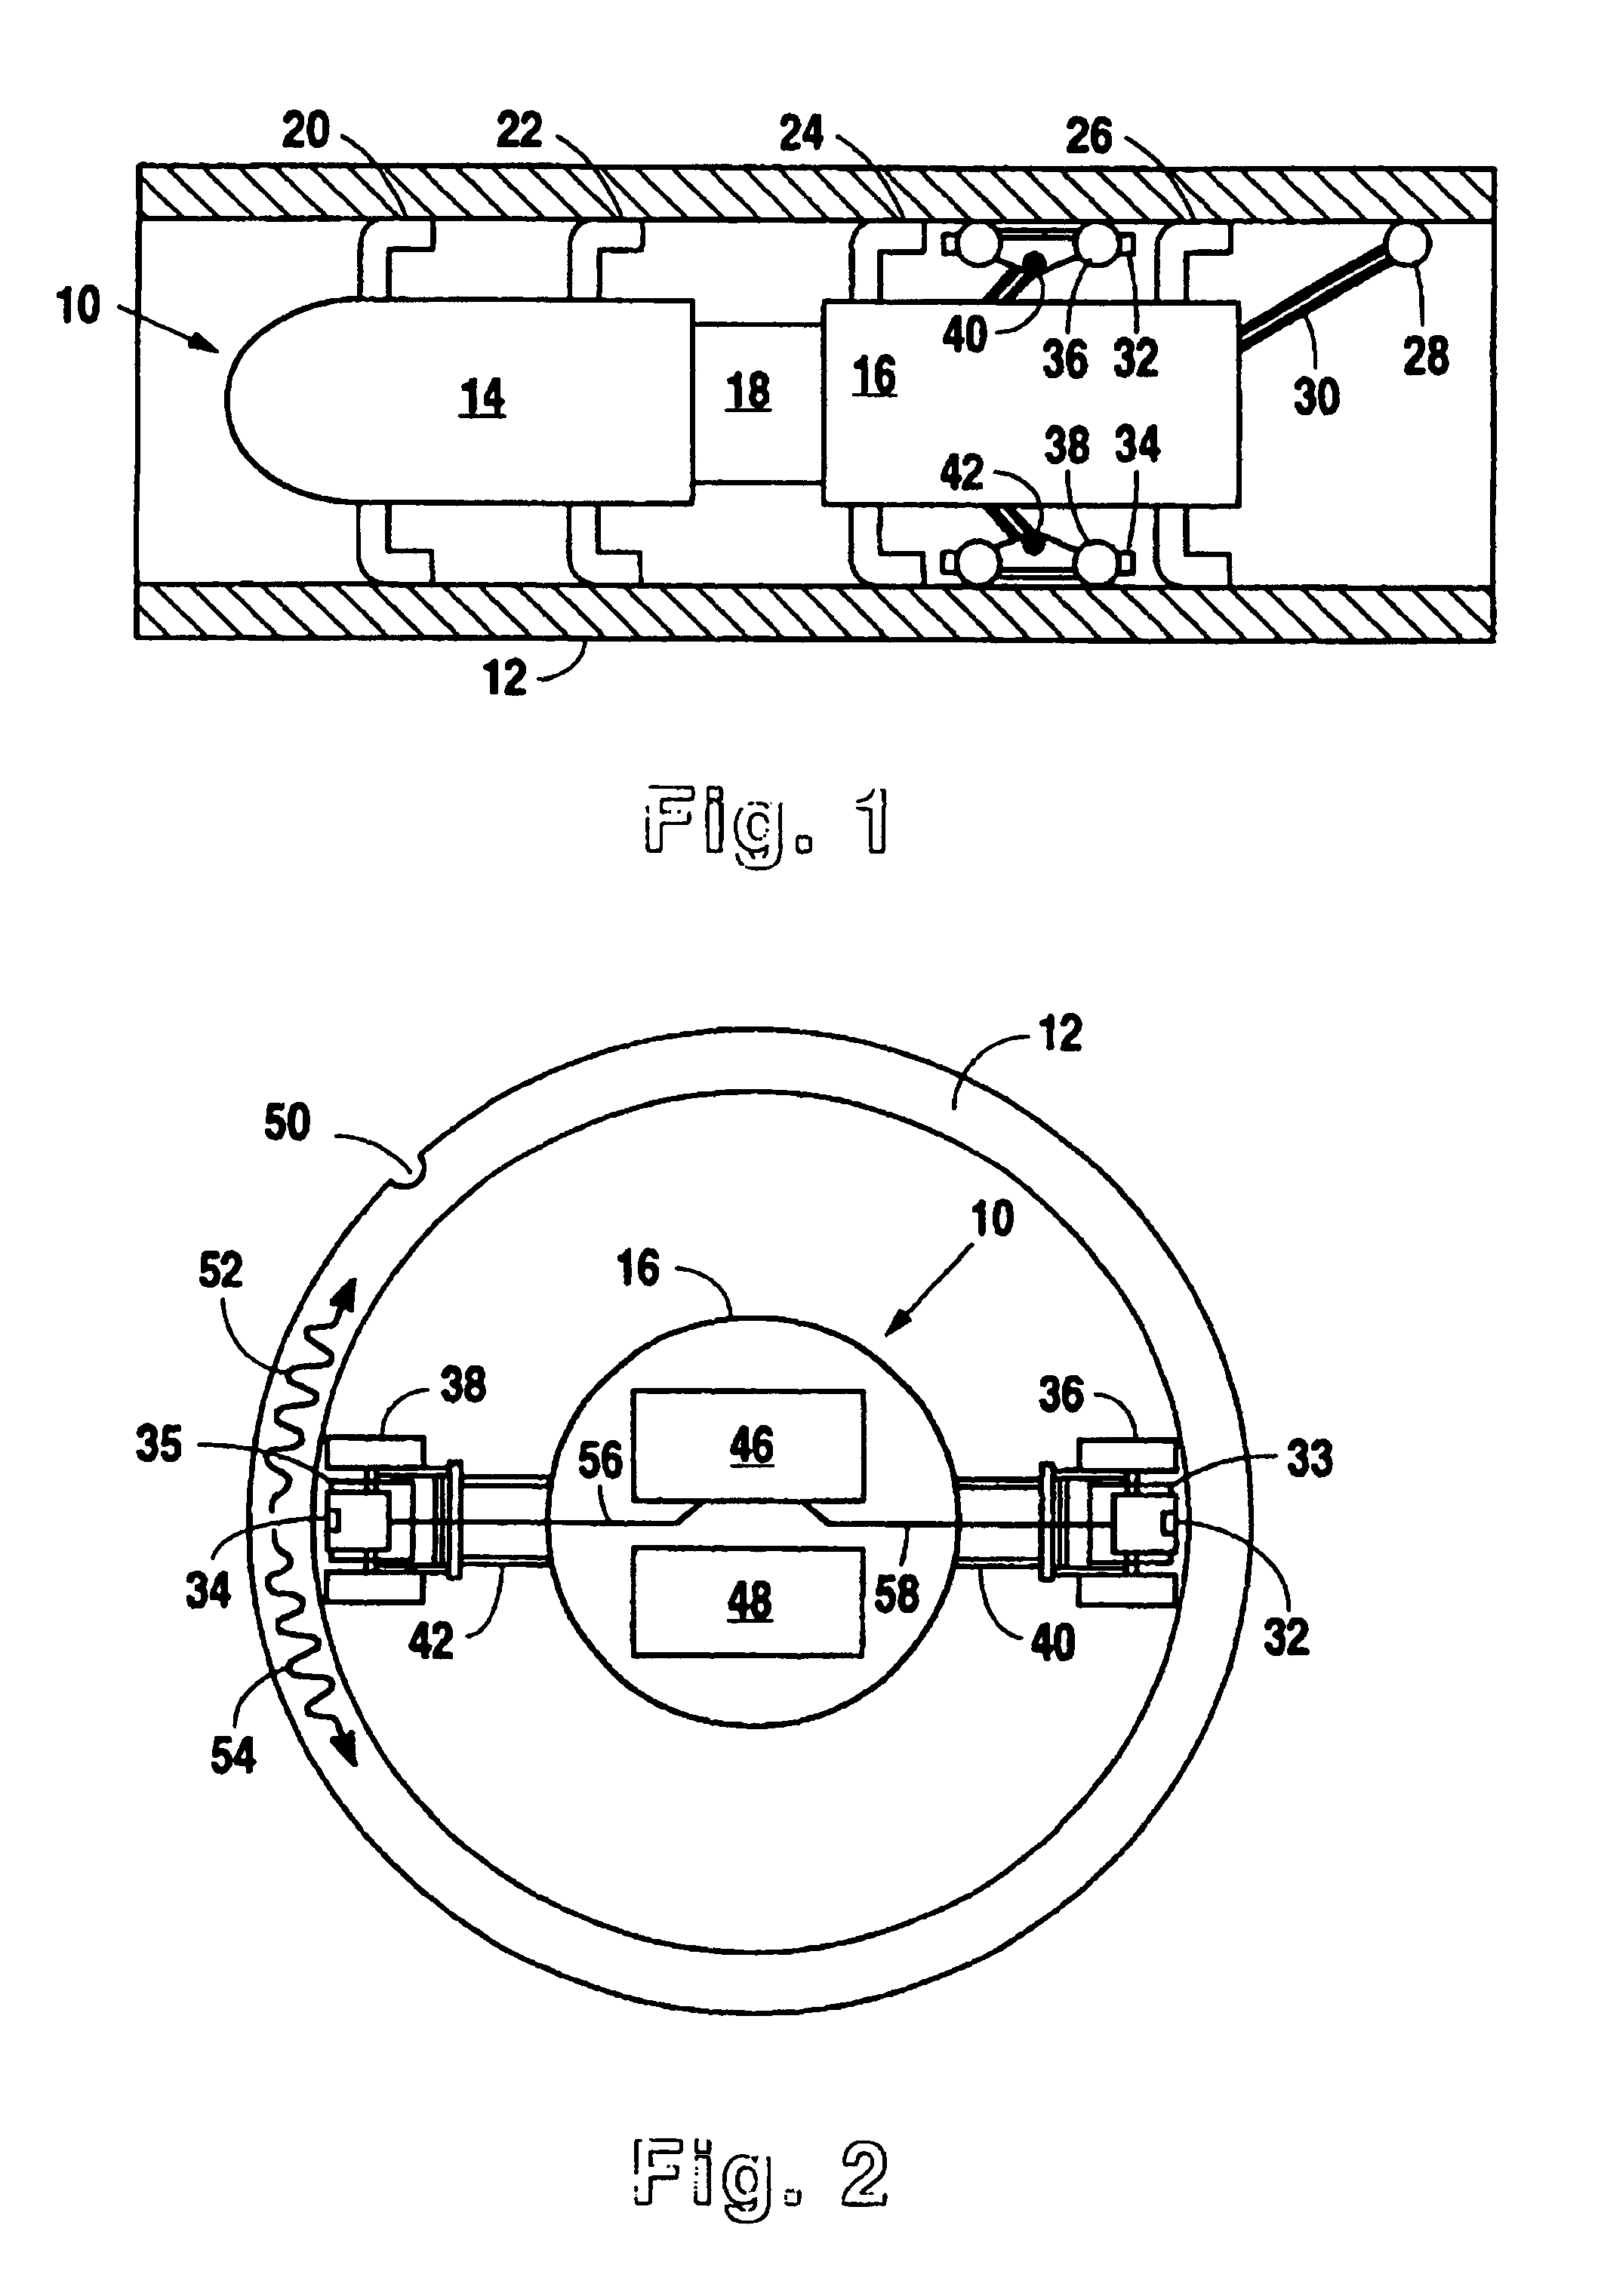 Method and apparatus for inspecting pipelines from an in-line inspection vehicle using magnetostrictive probes